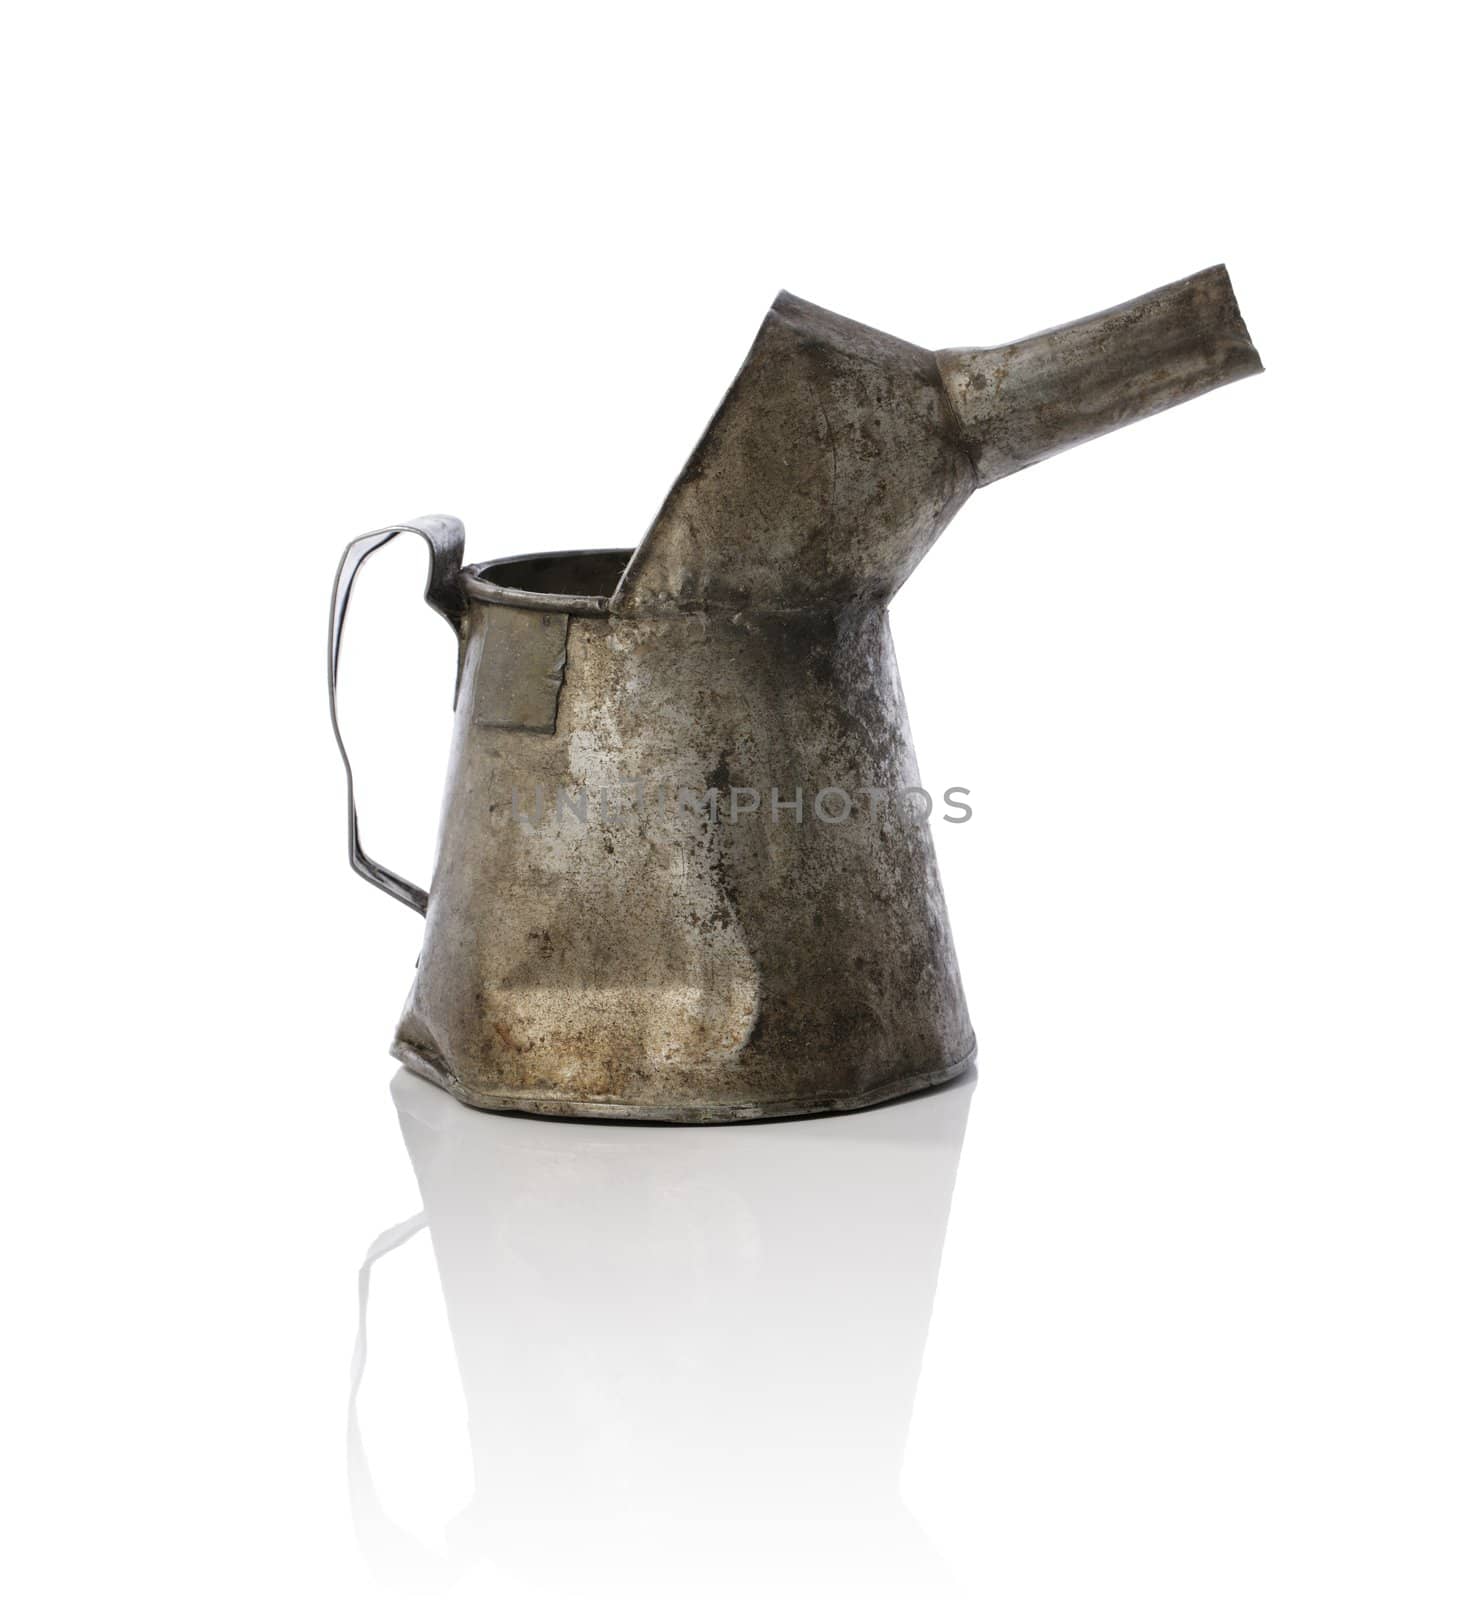 Old oil can by Stocksnapper